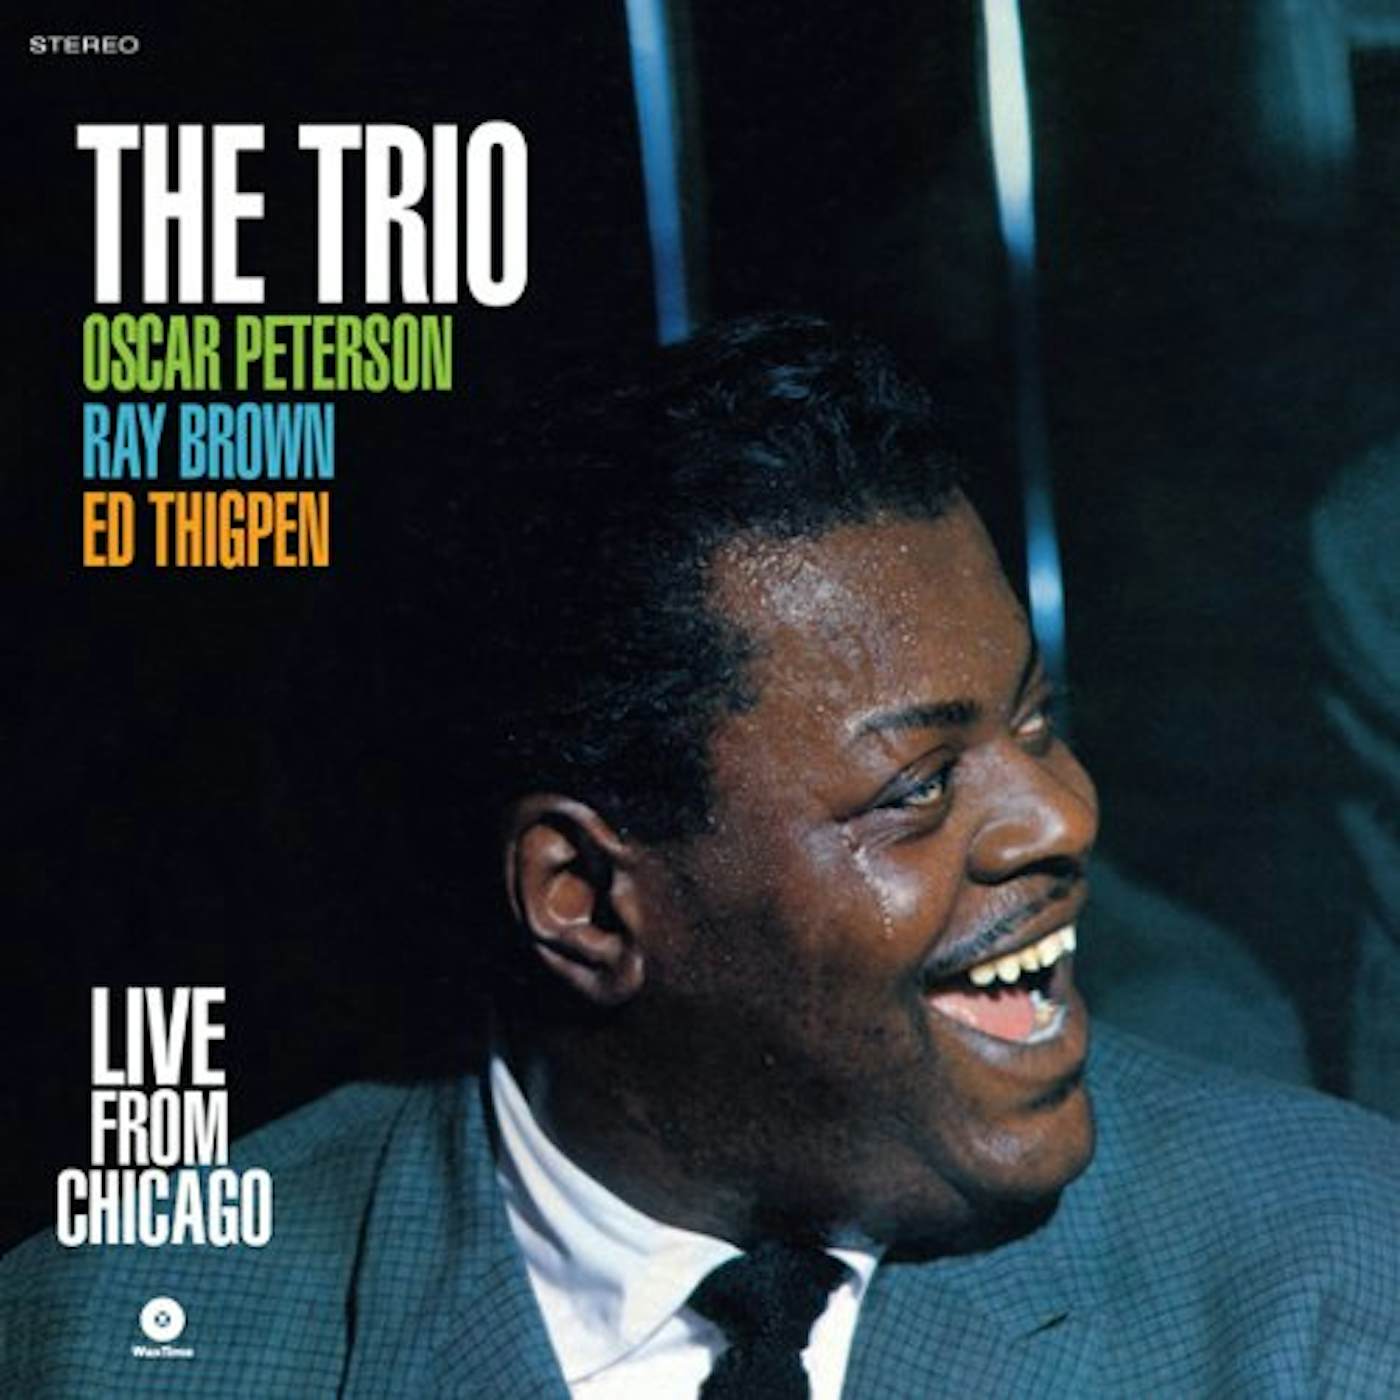 Oscar Peterson LIVE FROM CHICAGO Vinyl Record - Spain Release